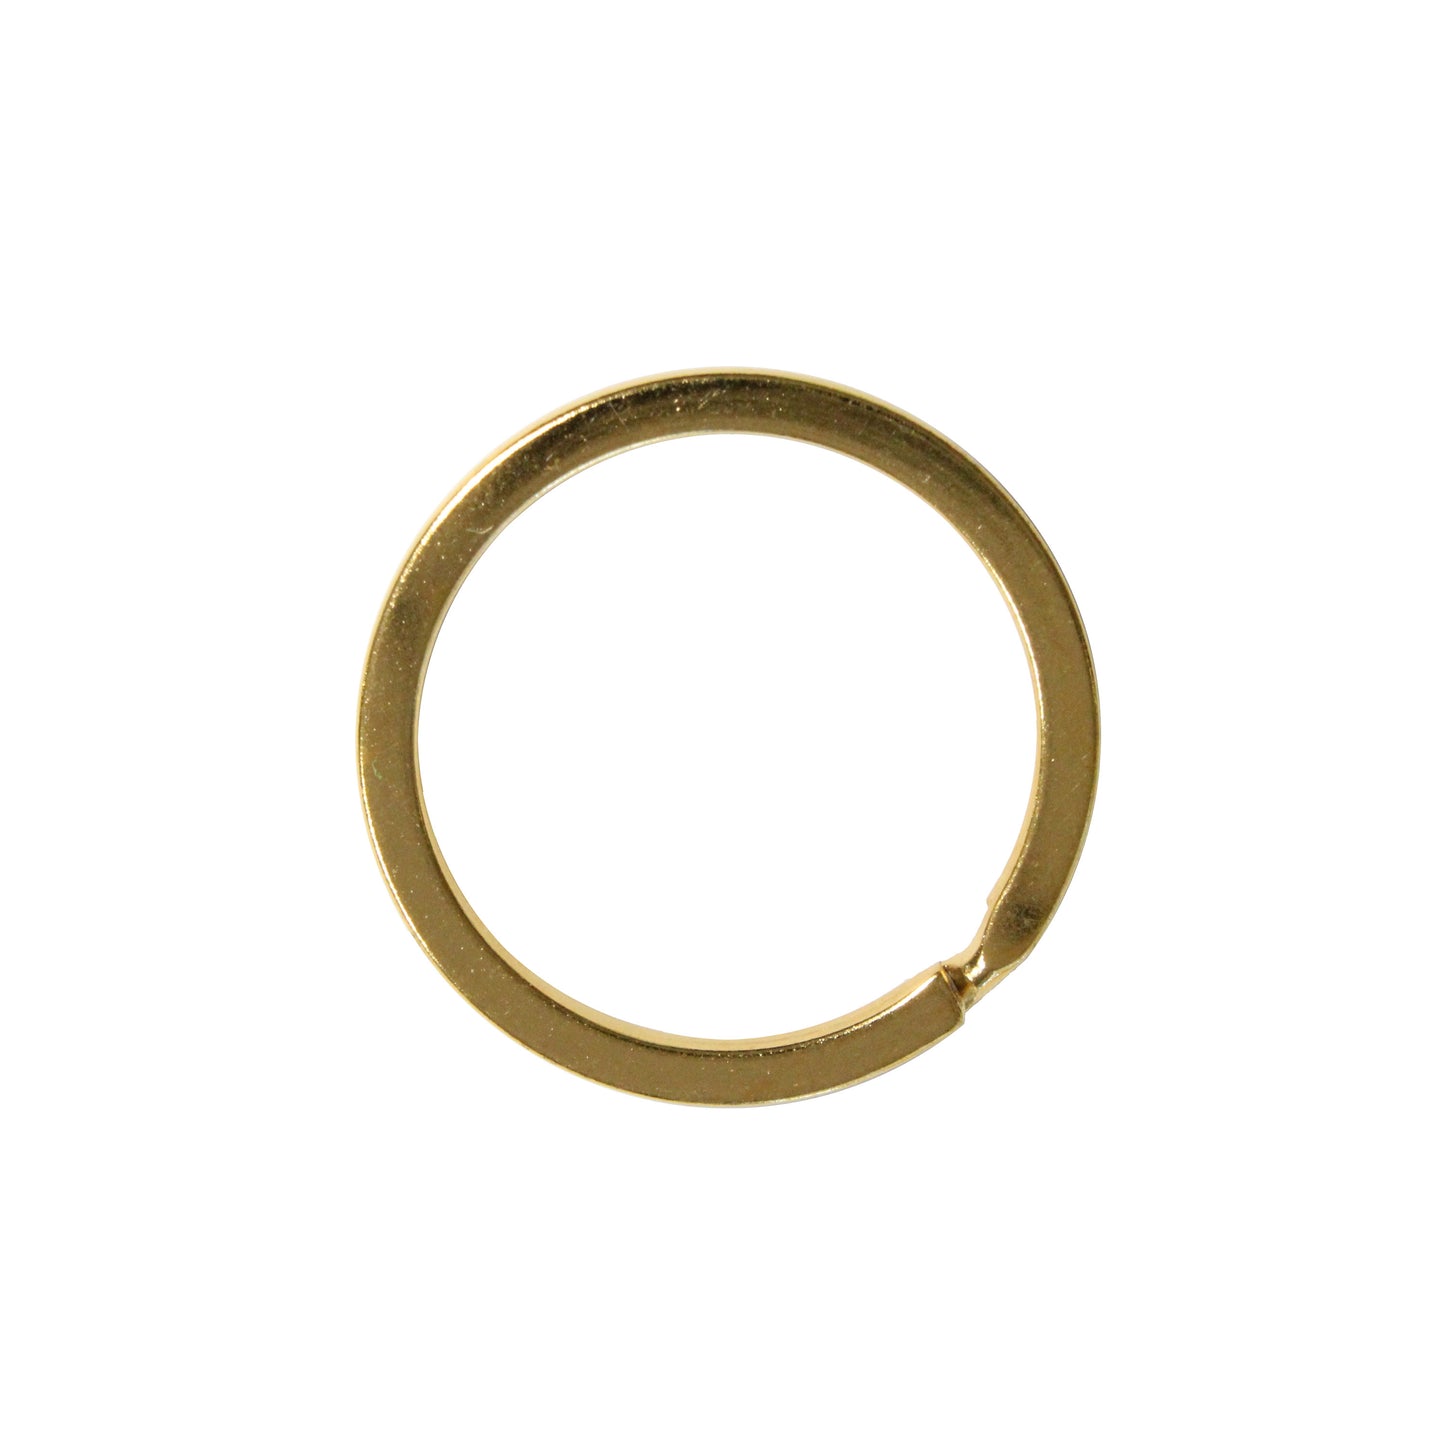 25mm Bright Brass Split Ring / sold individually / for key rings or secure charms or tags